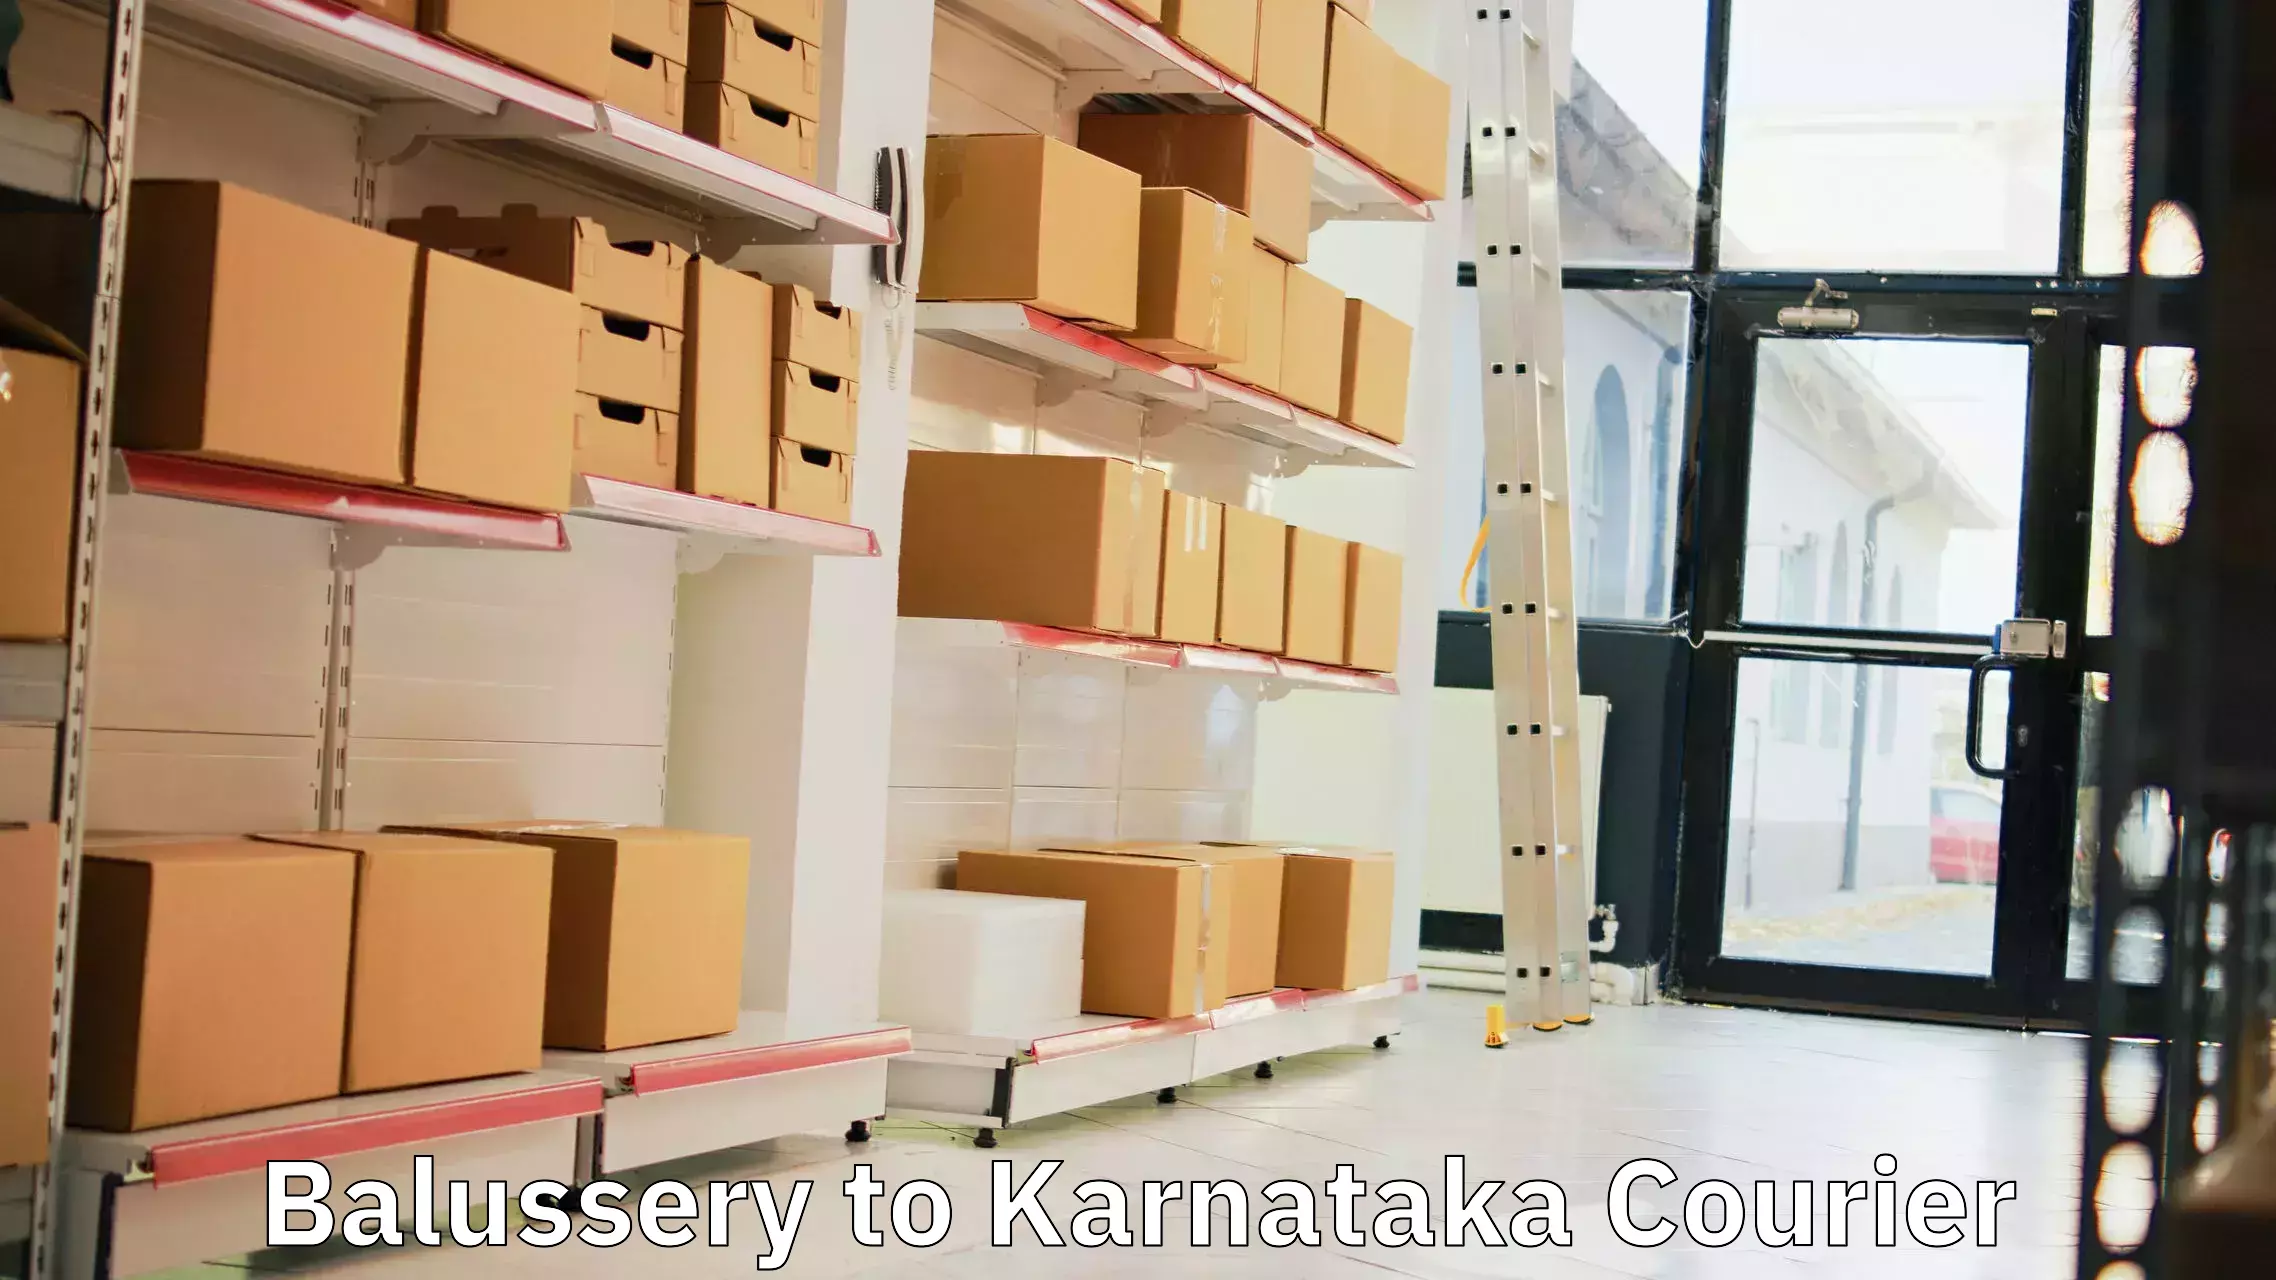 Comprehensive delivery network in Balussery to Kanjarakatte